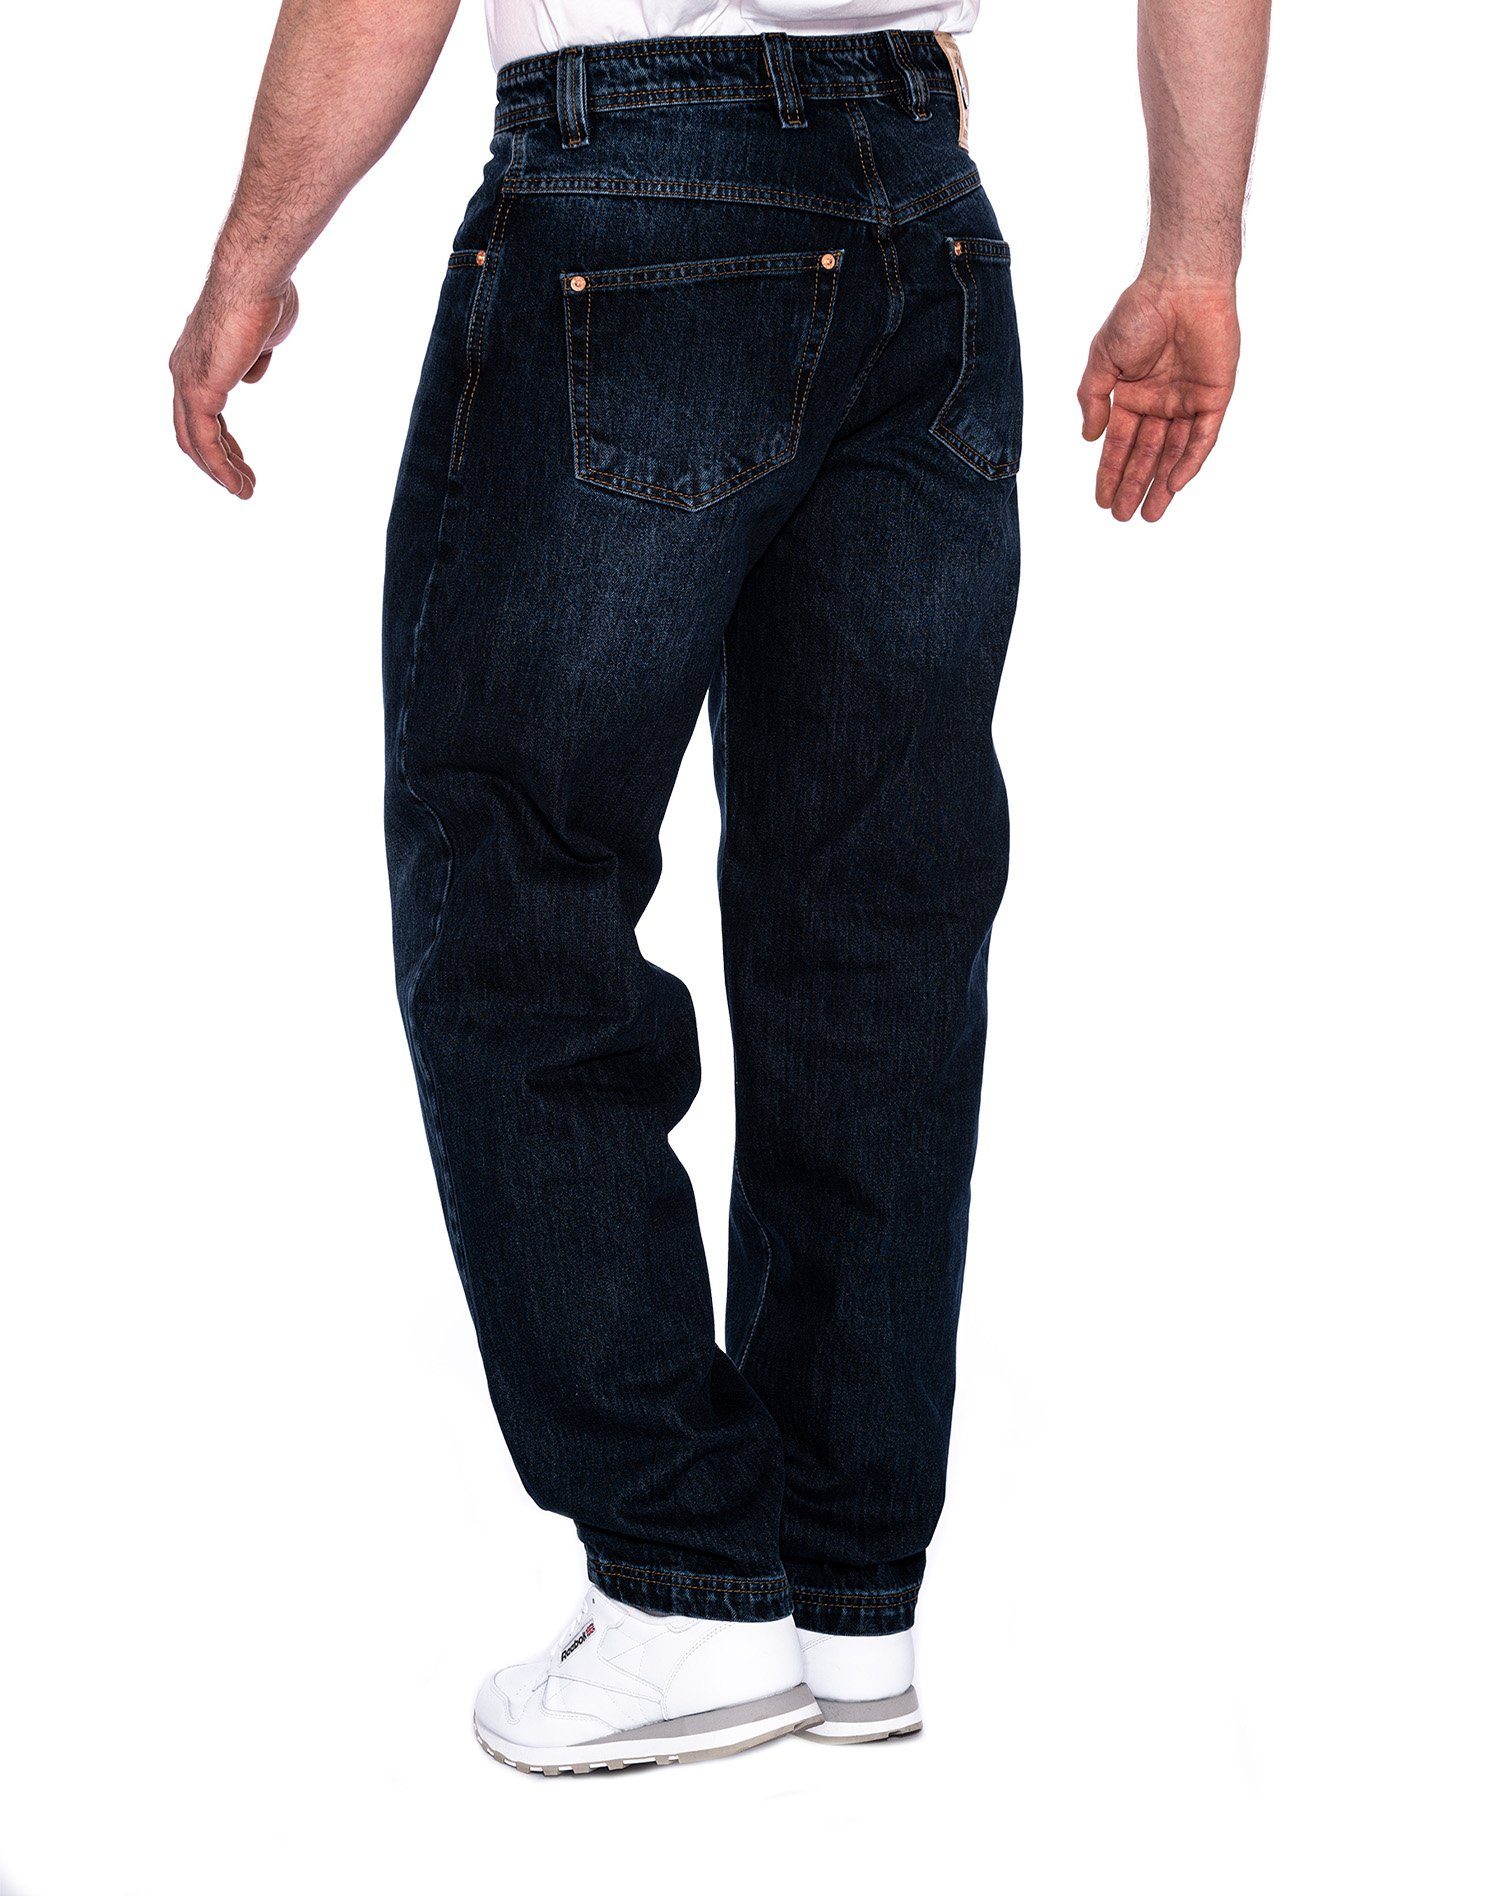 Hurricane Zicco Jeans PICALDI Pocket Fit, Jeans Loose Jeans 471 Five Weite